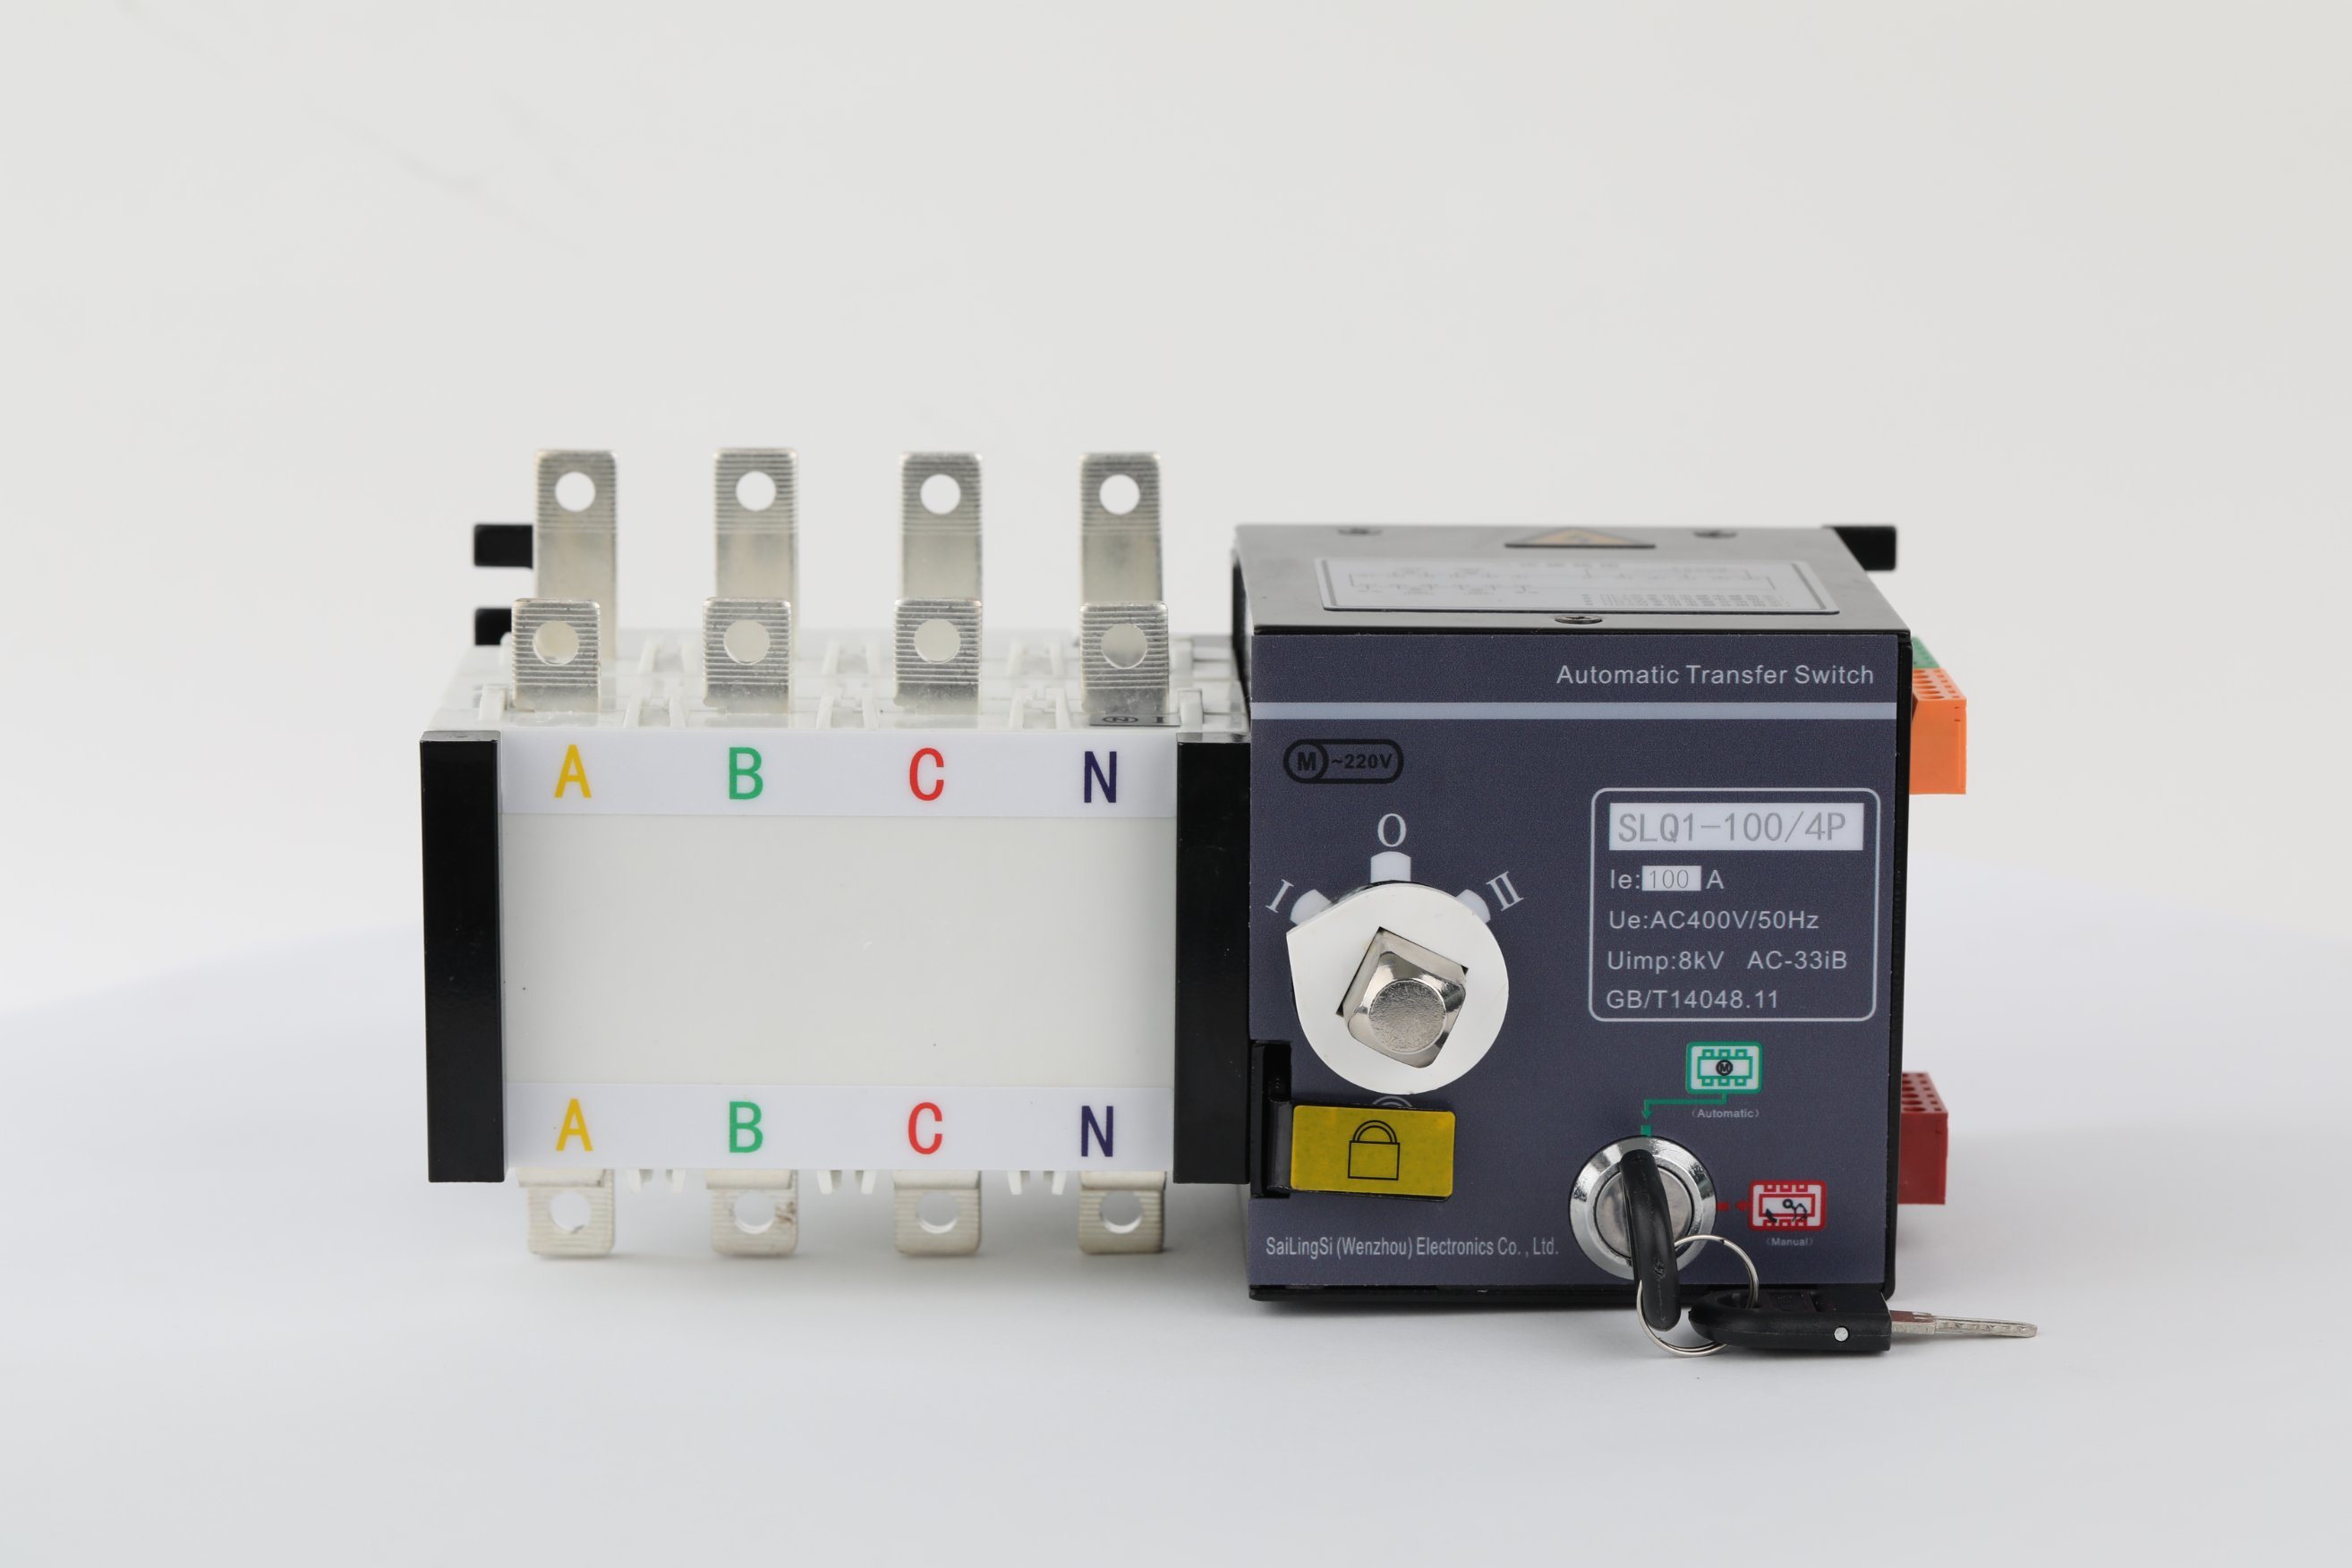 Uvq1-1600A 4p ATS 400V 50Hz ATS Self Return Electric Automatic Transfer Switch with Fire Control